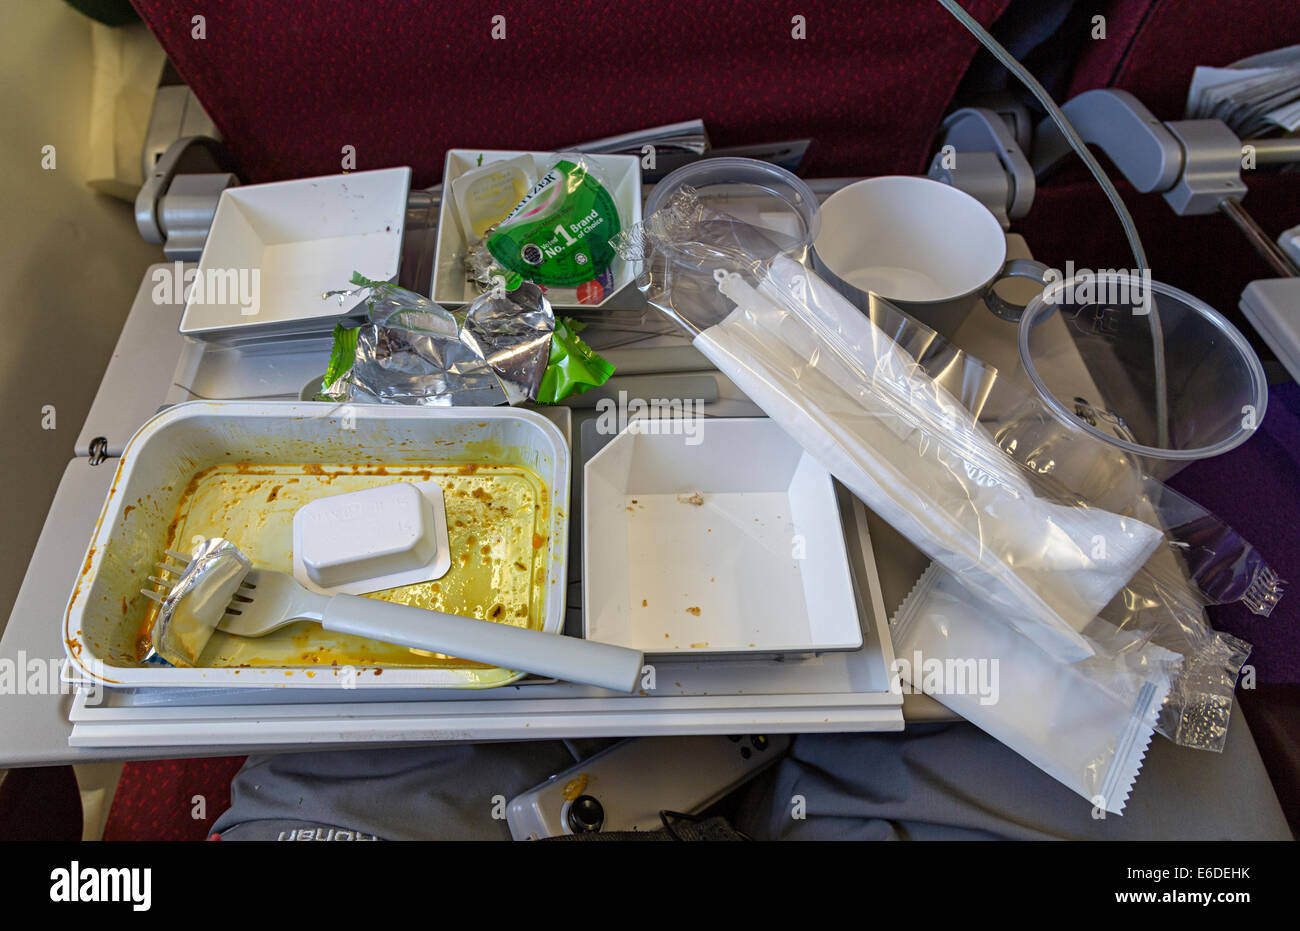 Waste packaging left after aircraft meal in flight Miri to London with Malaysia Airlines Stock Photo